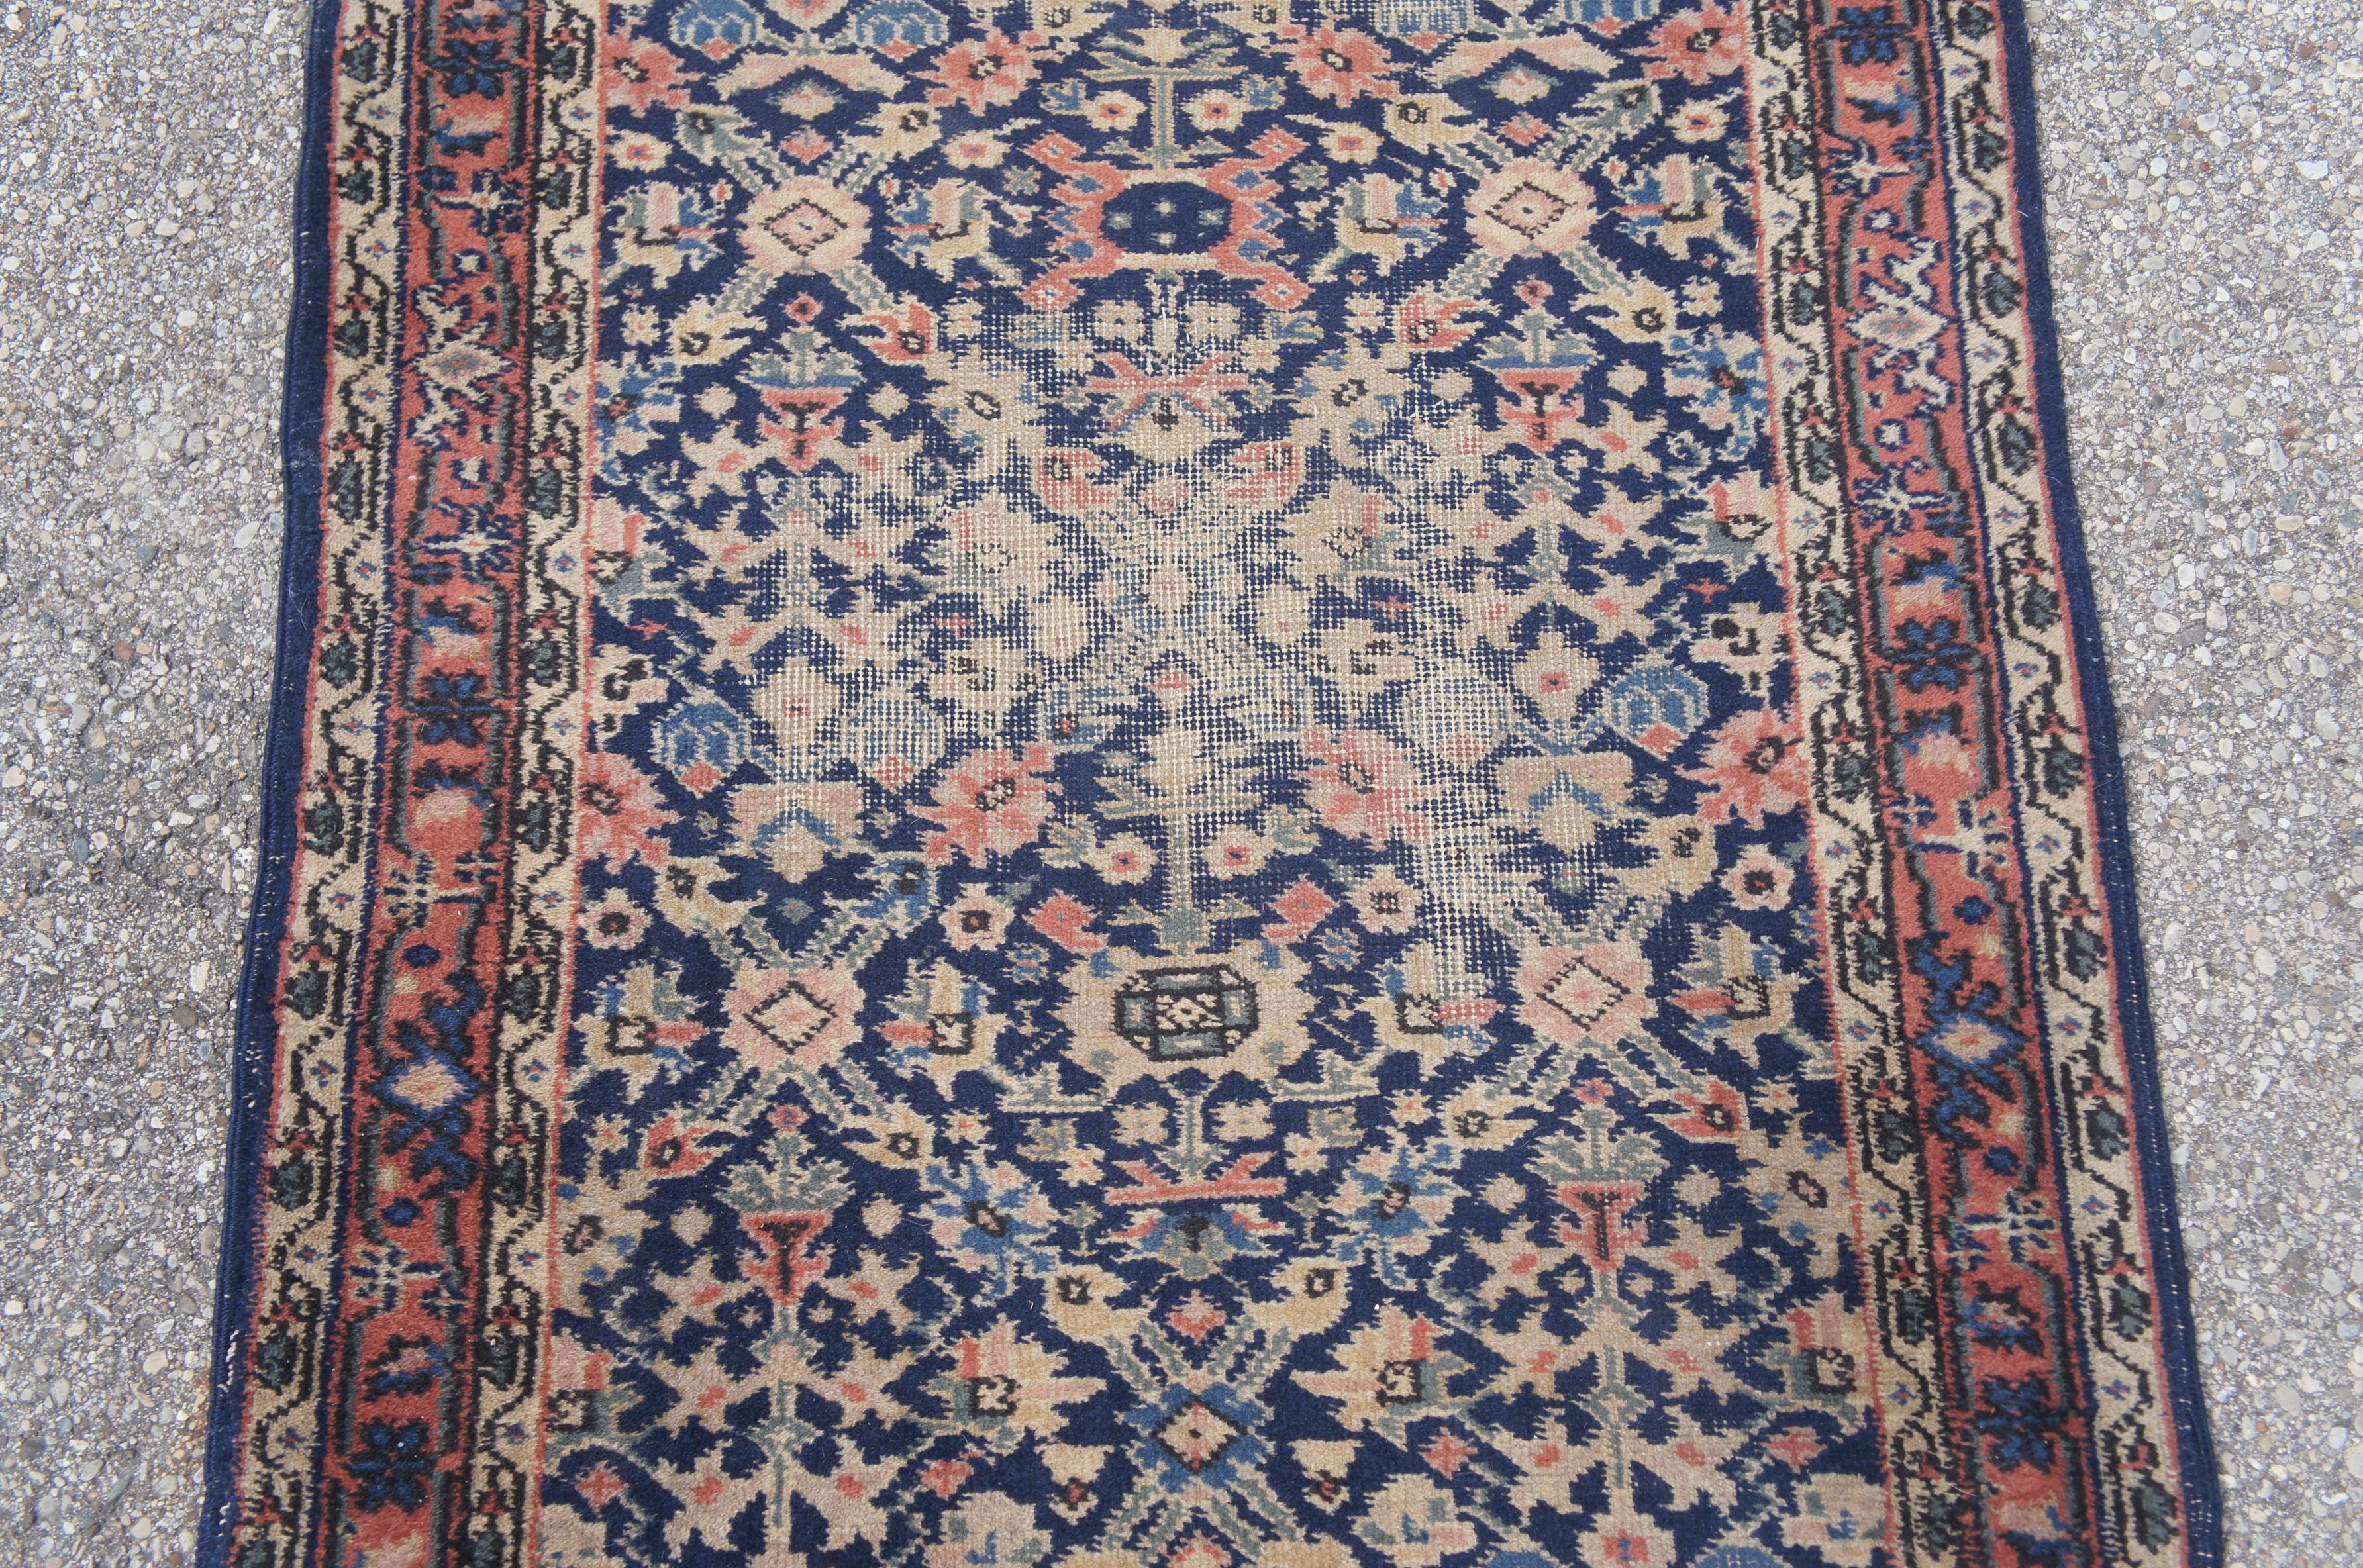 Vintage Hand Knotted Persian Geometric Red & Blue Wool Rug Runner Carpet 3 x 9' In Good Condition For Sale In Dayton, OH